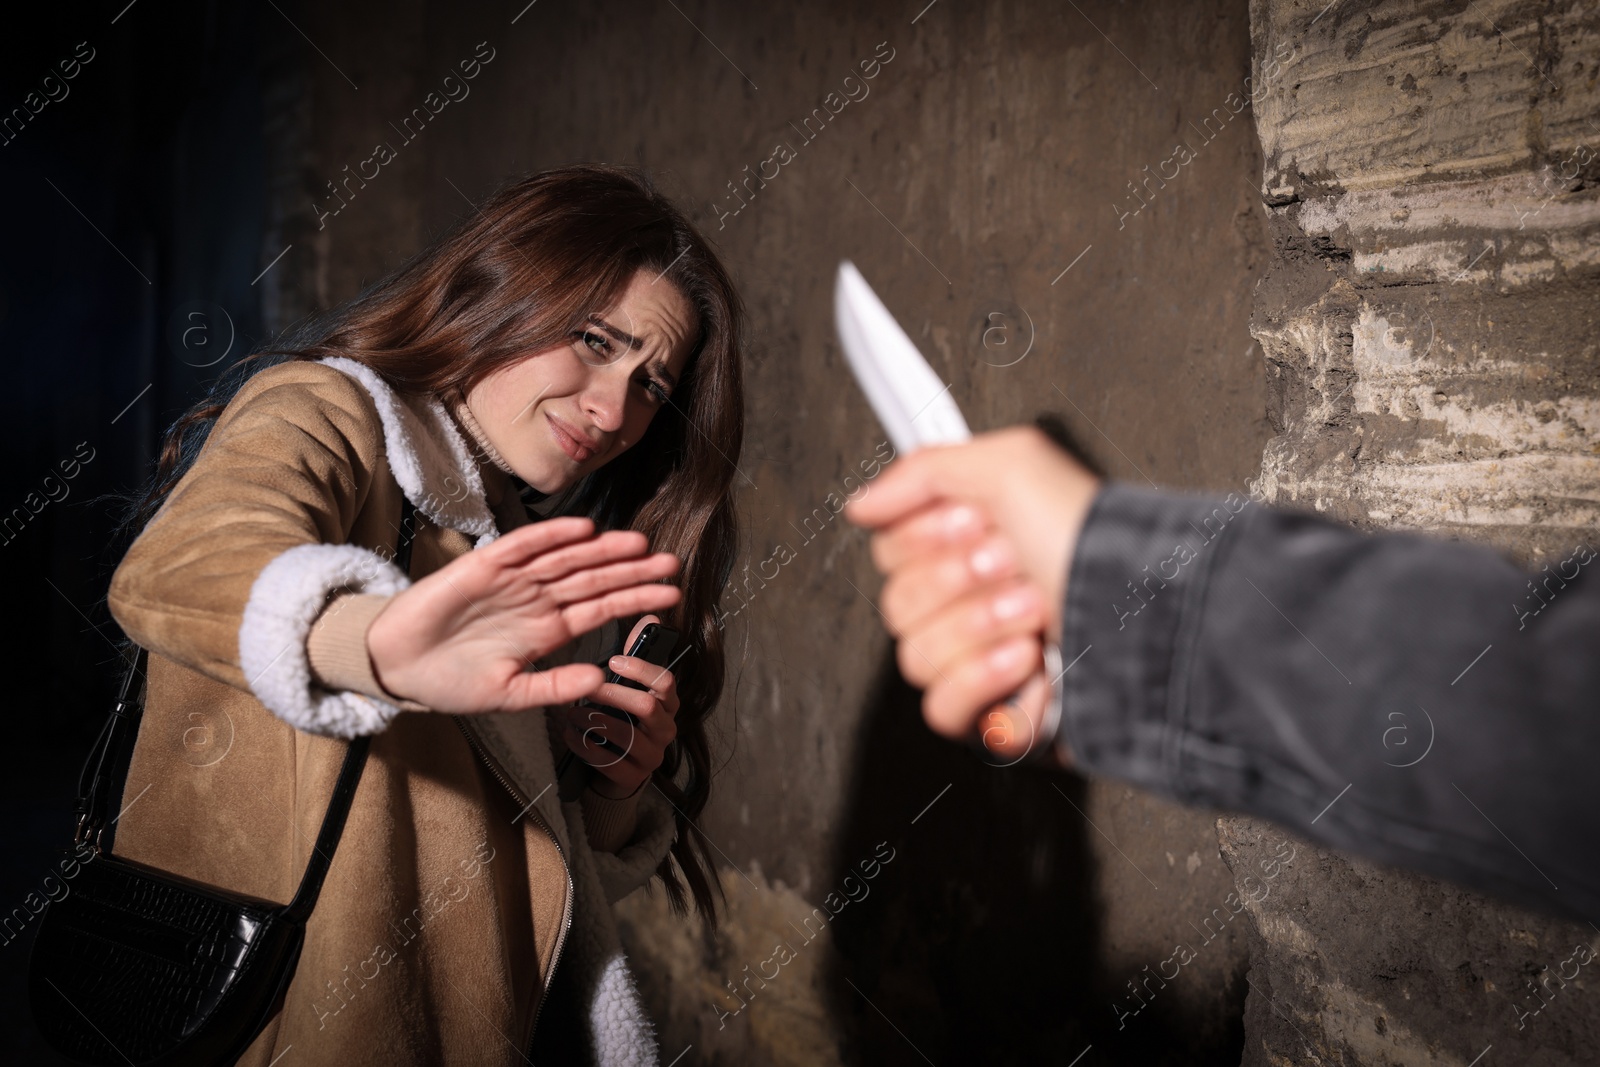 Photo of Criminal threatening young woman with knife at night. Self defense concept